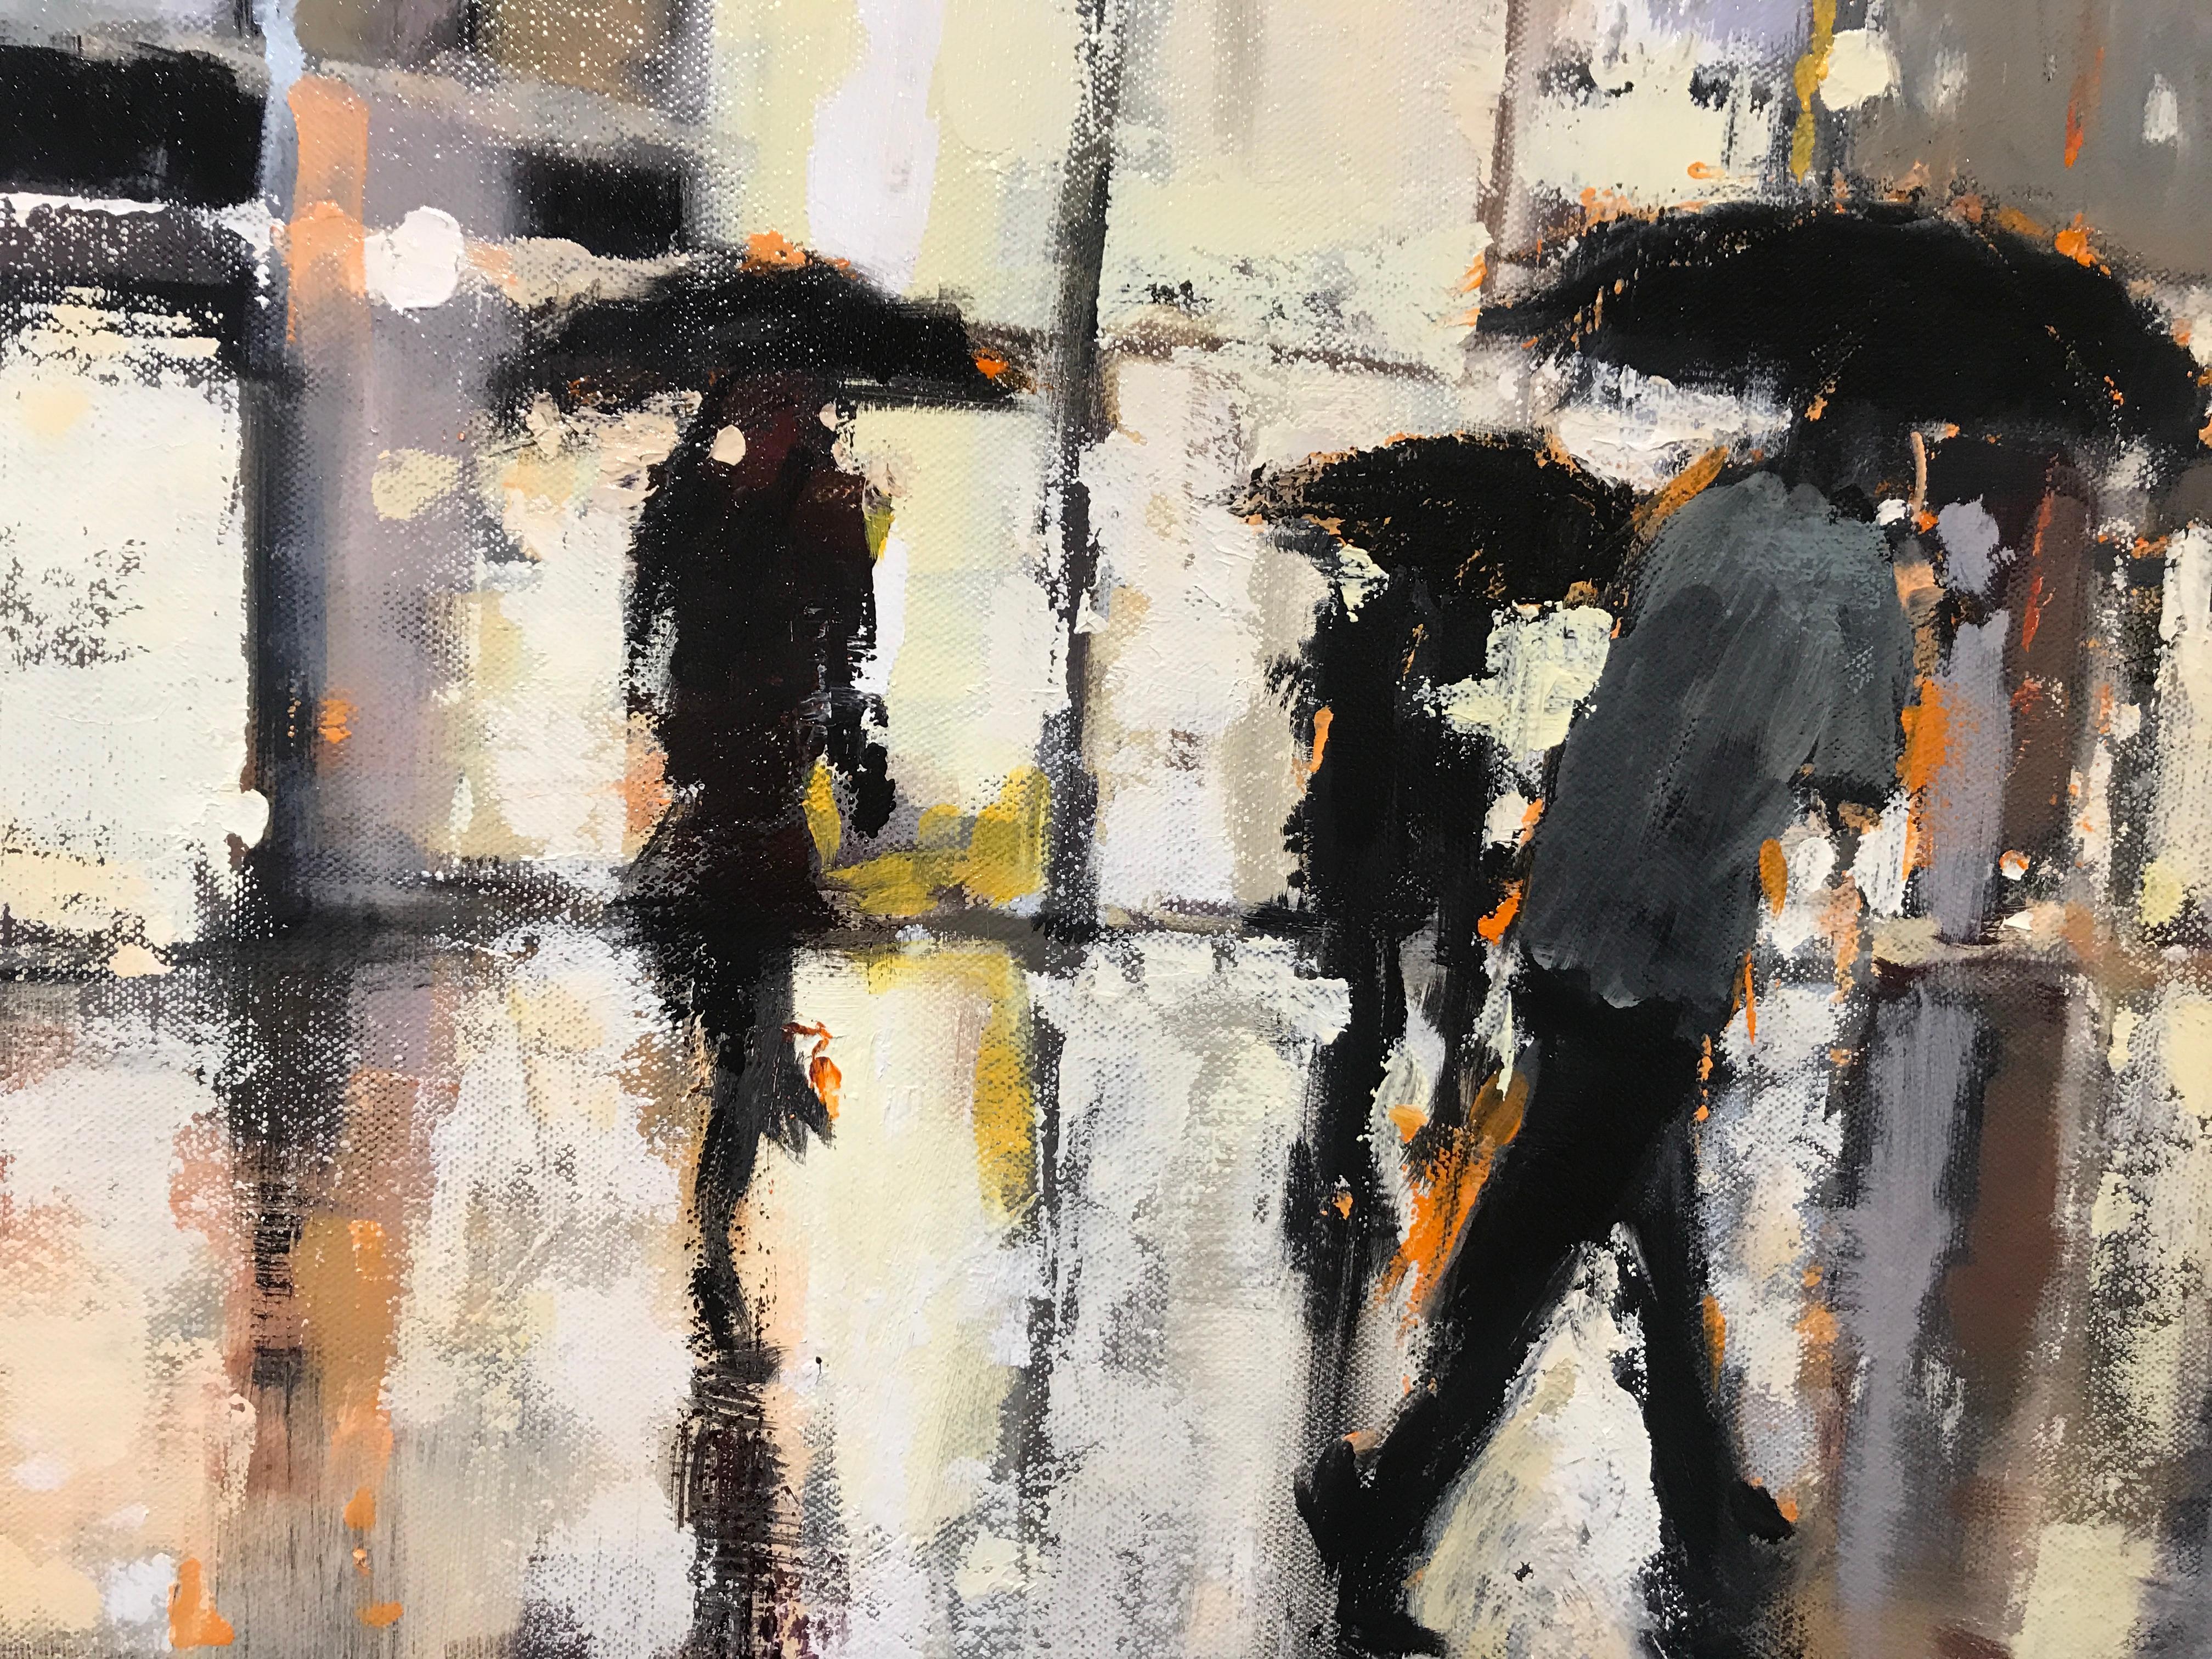 'Suspended in Time' is a framed horizontal oil on canvas Impressionist painting created by Irish artist Lorraine Christie in 2018. Featuring a muted palette made of beige and black tones highlighted by bold orange accents, the painting depicts an